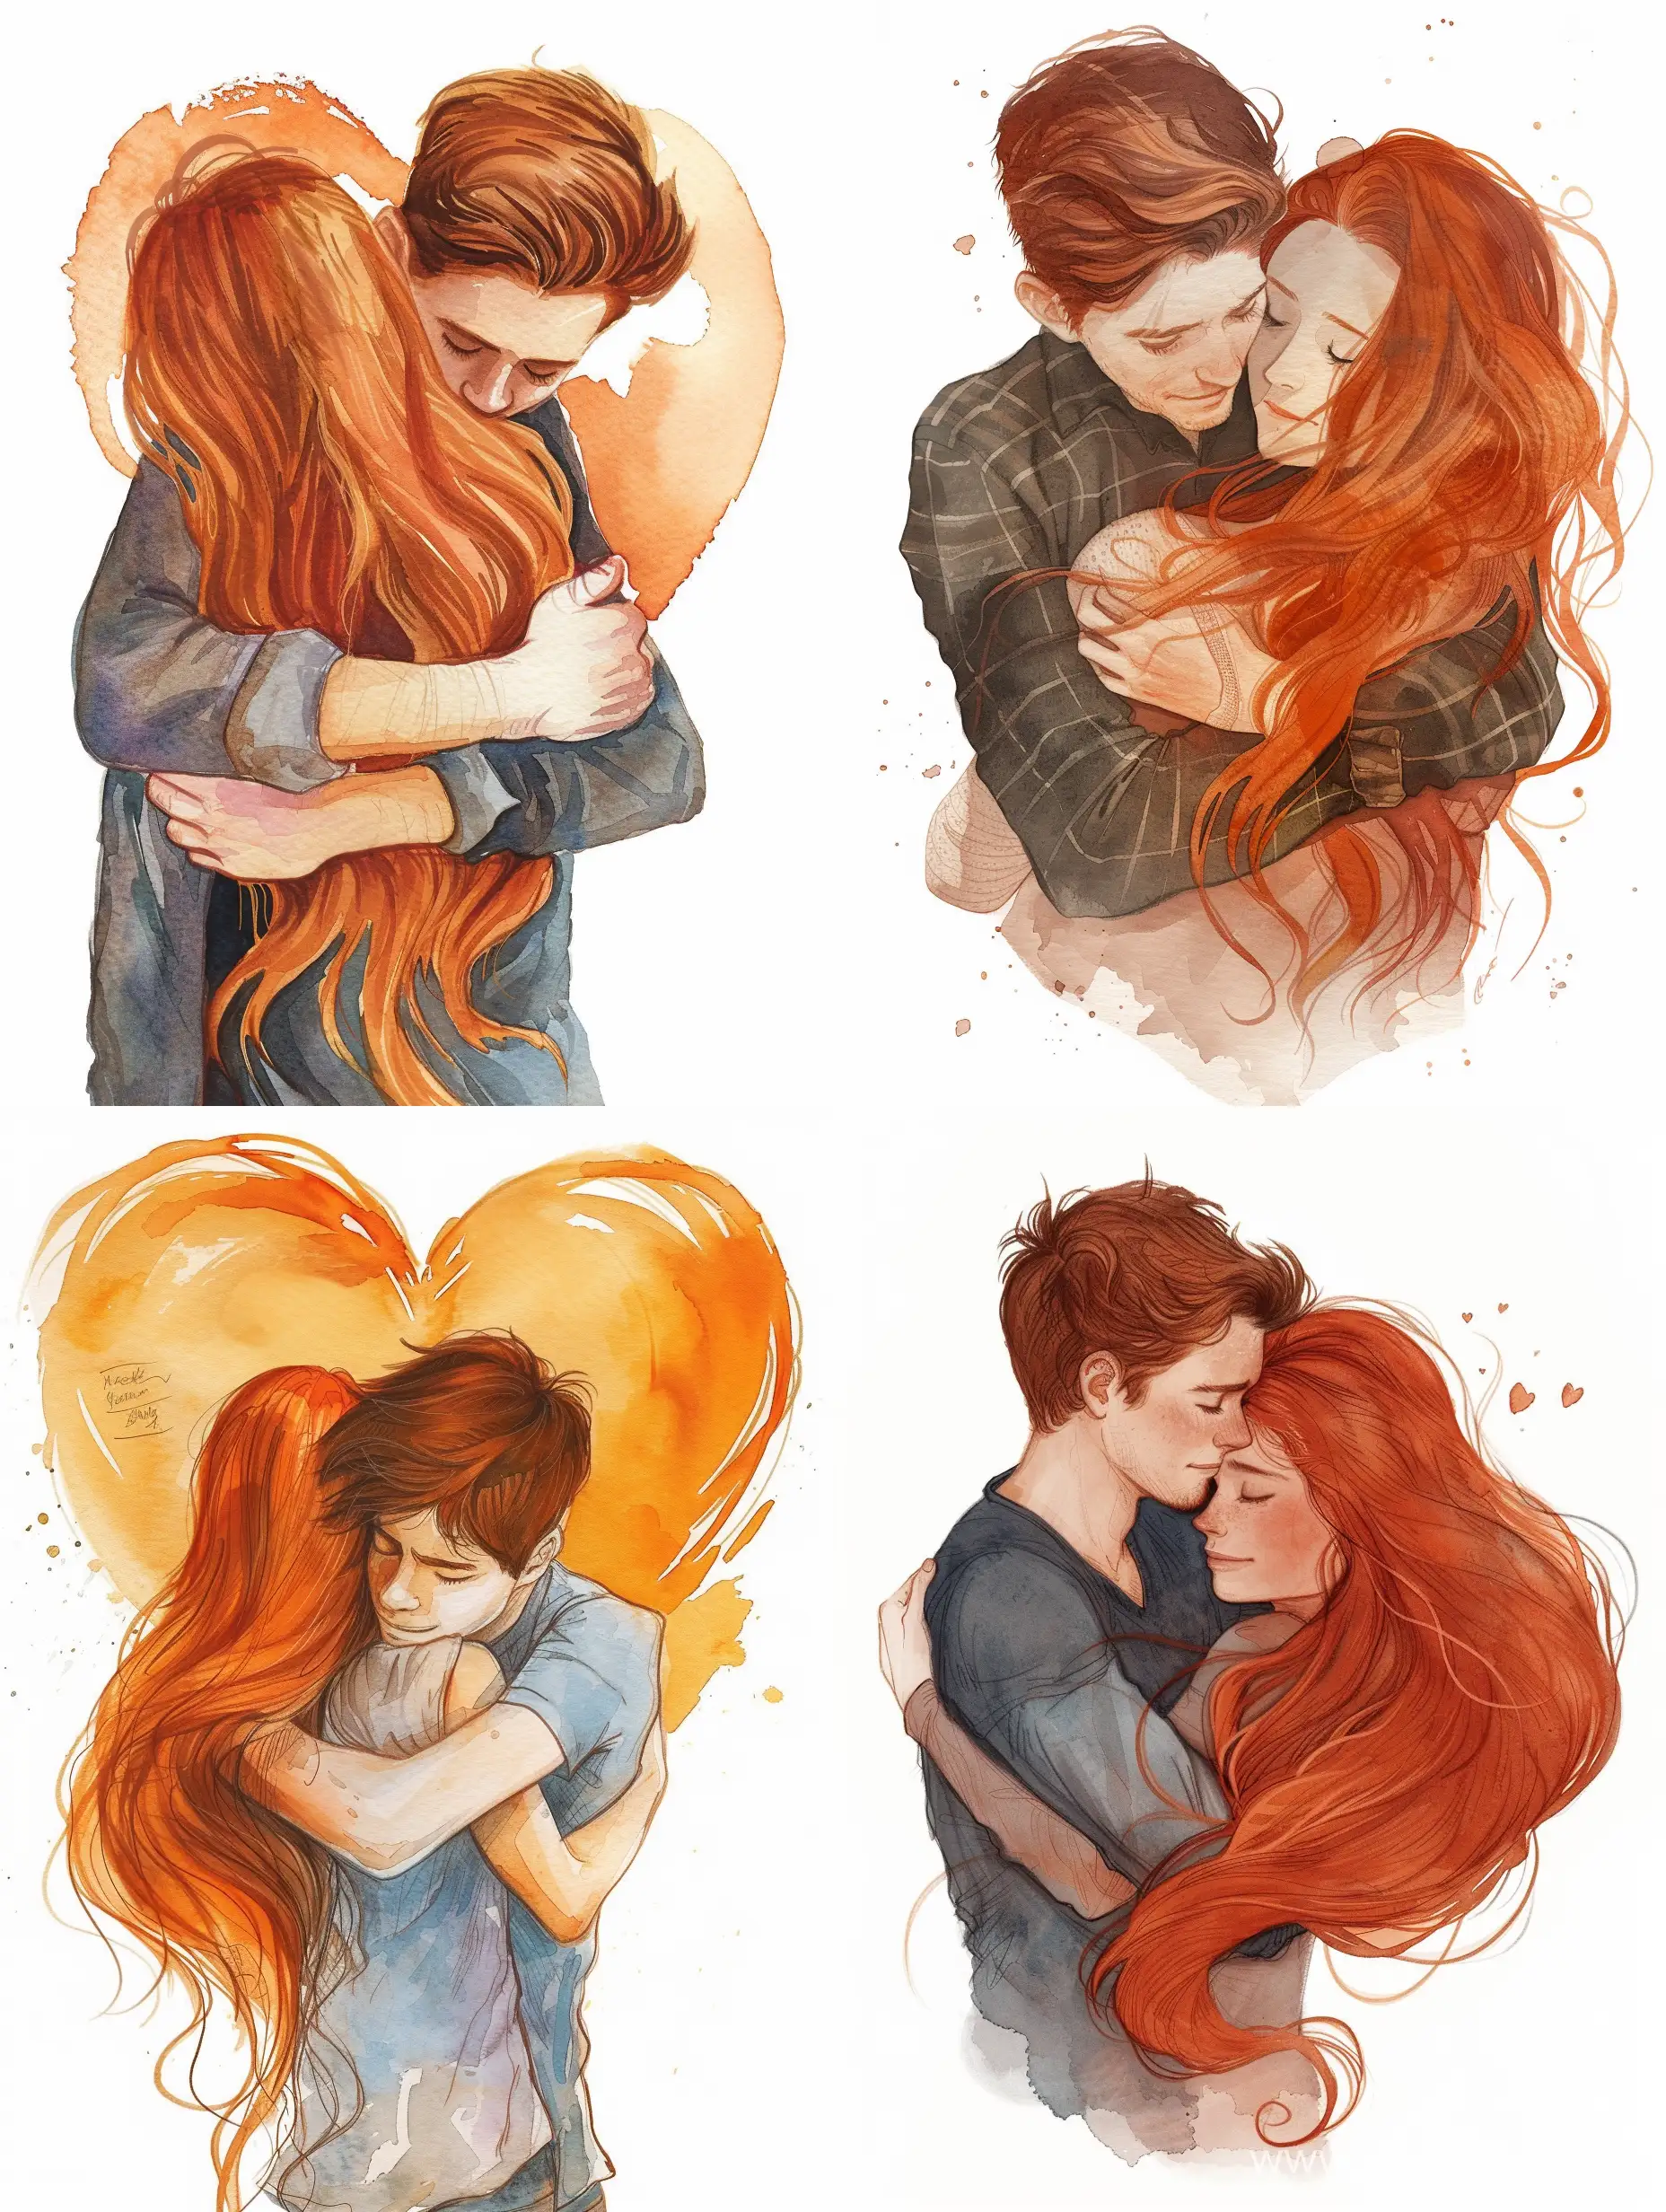 Affectionate-Brunette-Guy-Embracing-Beautiful-RedHaired-Girl-in-Heartwarming-Watercolor-Illustration